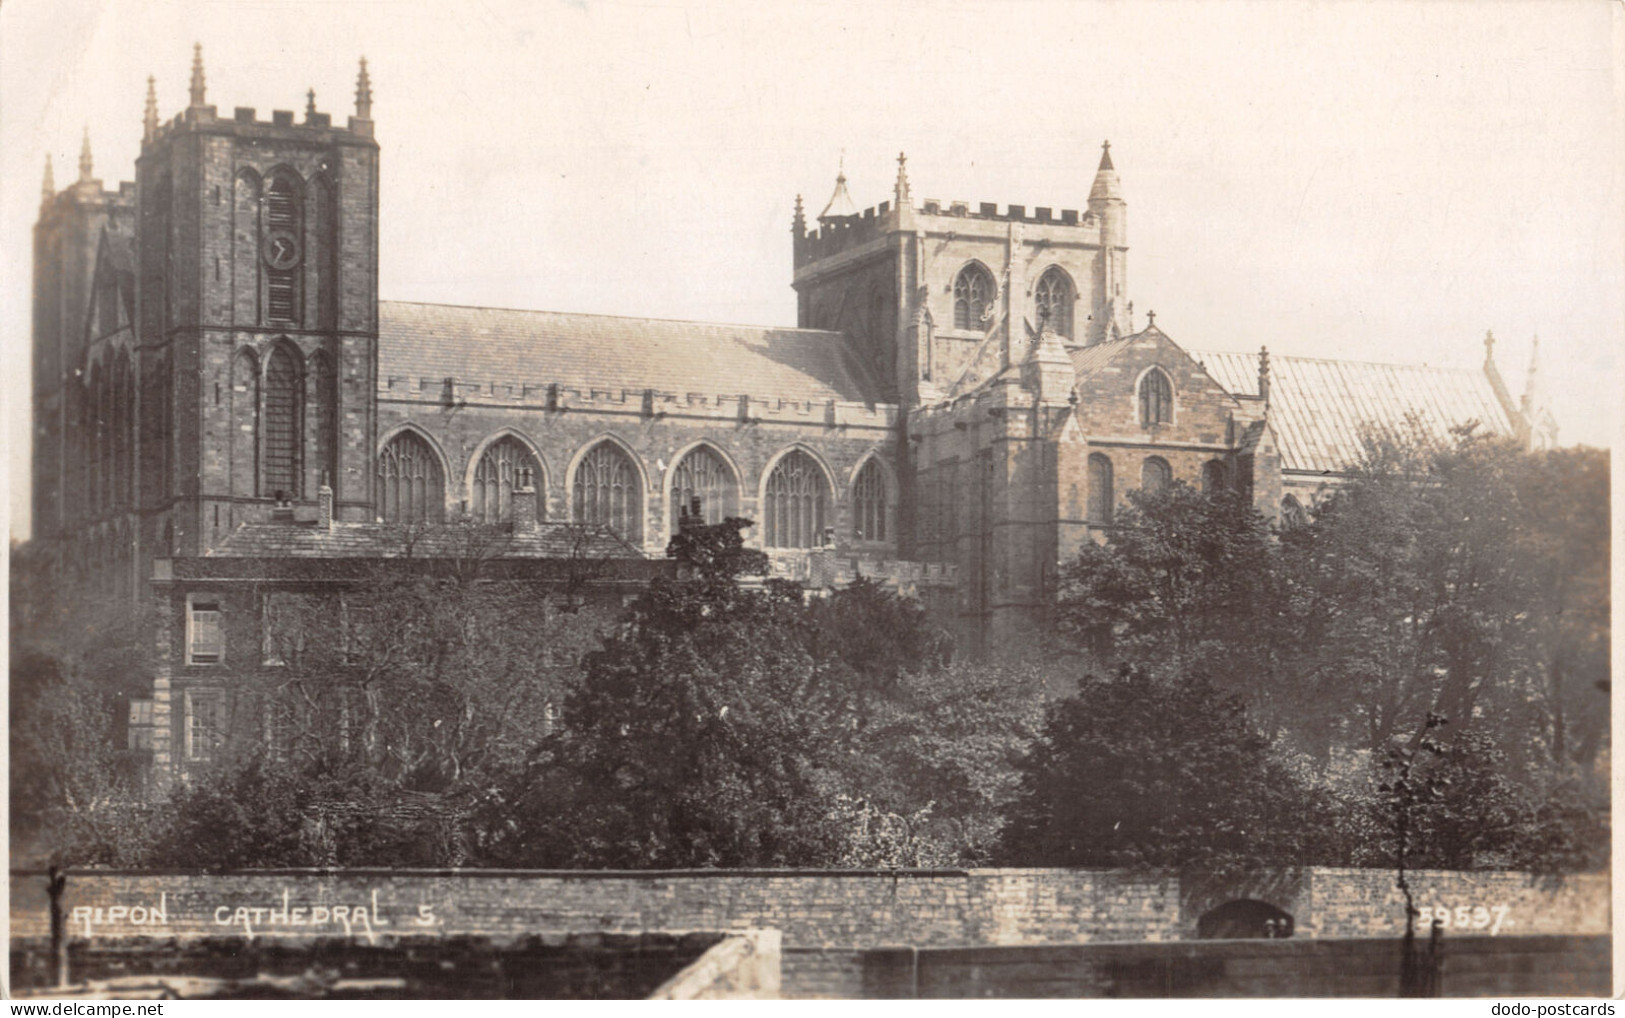 R334978 Ripon Cathedral S. 59537. RP. Photochrom. 1928 - Monde